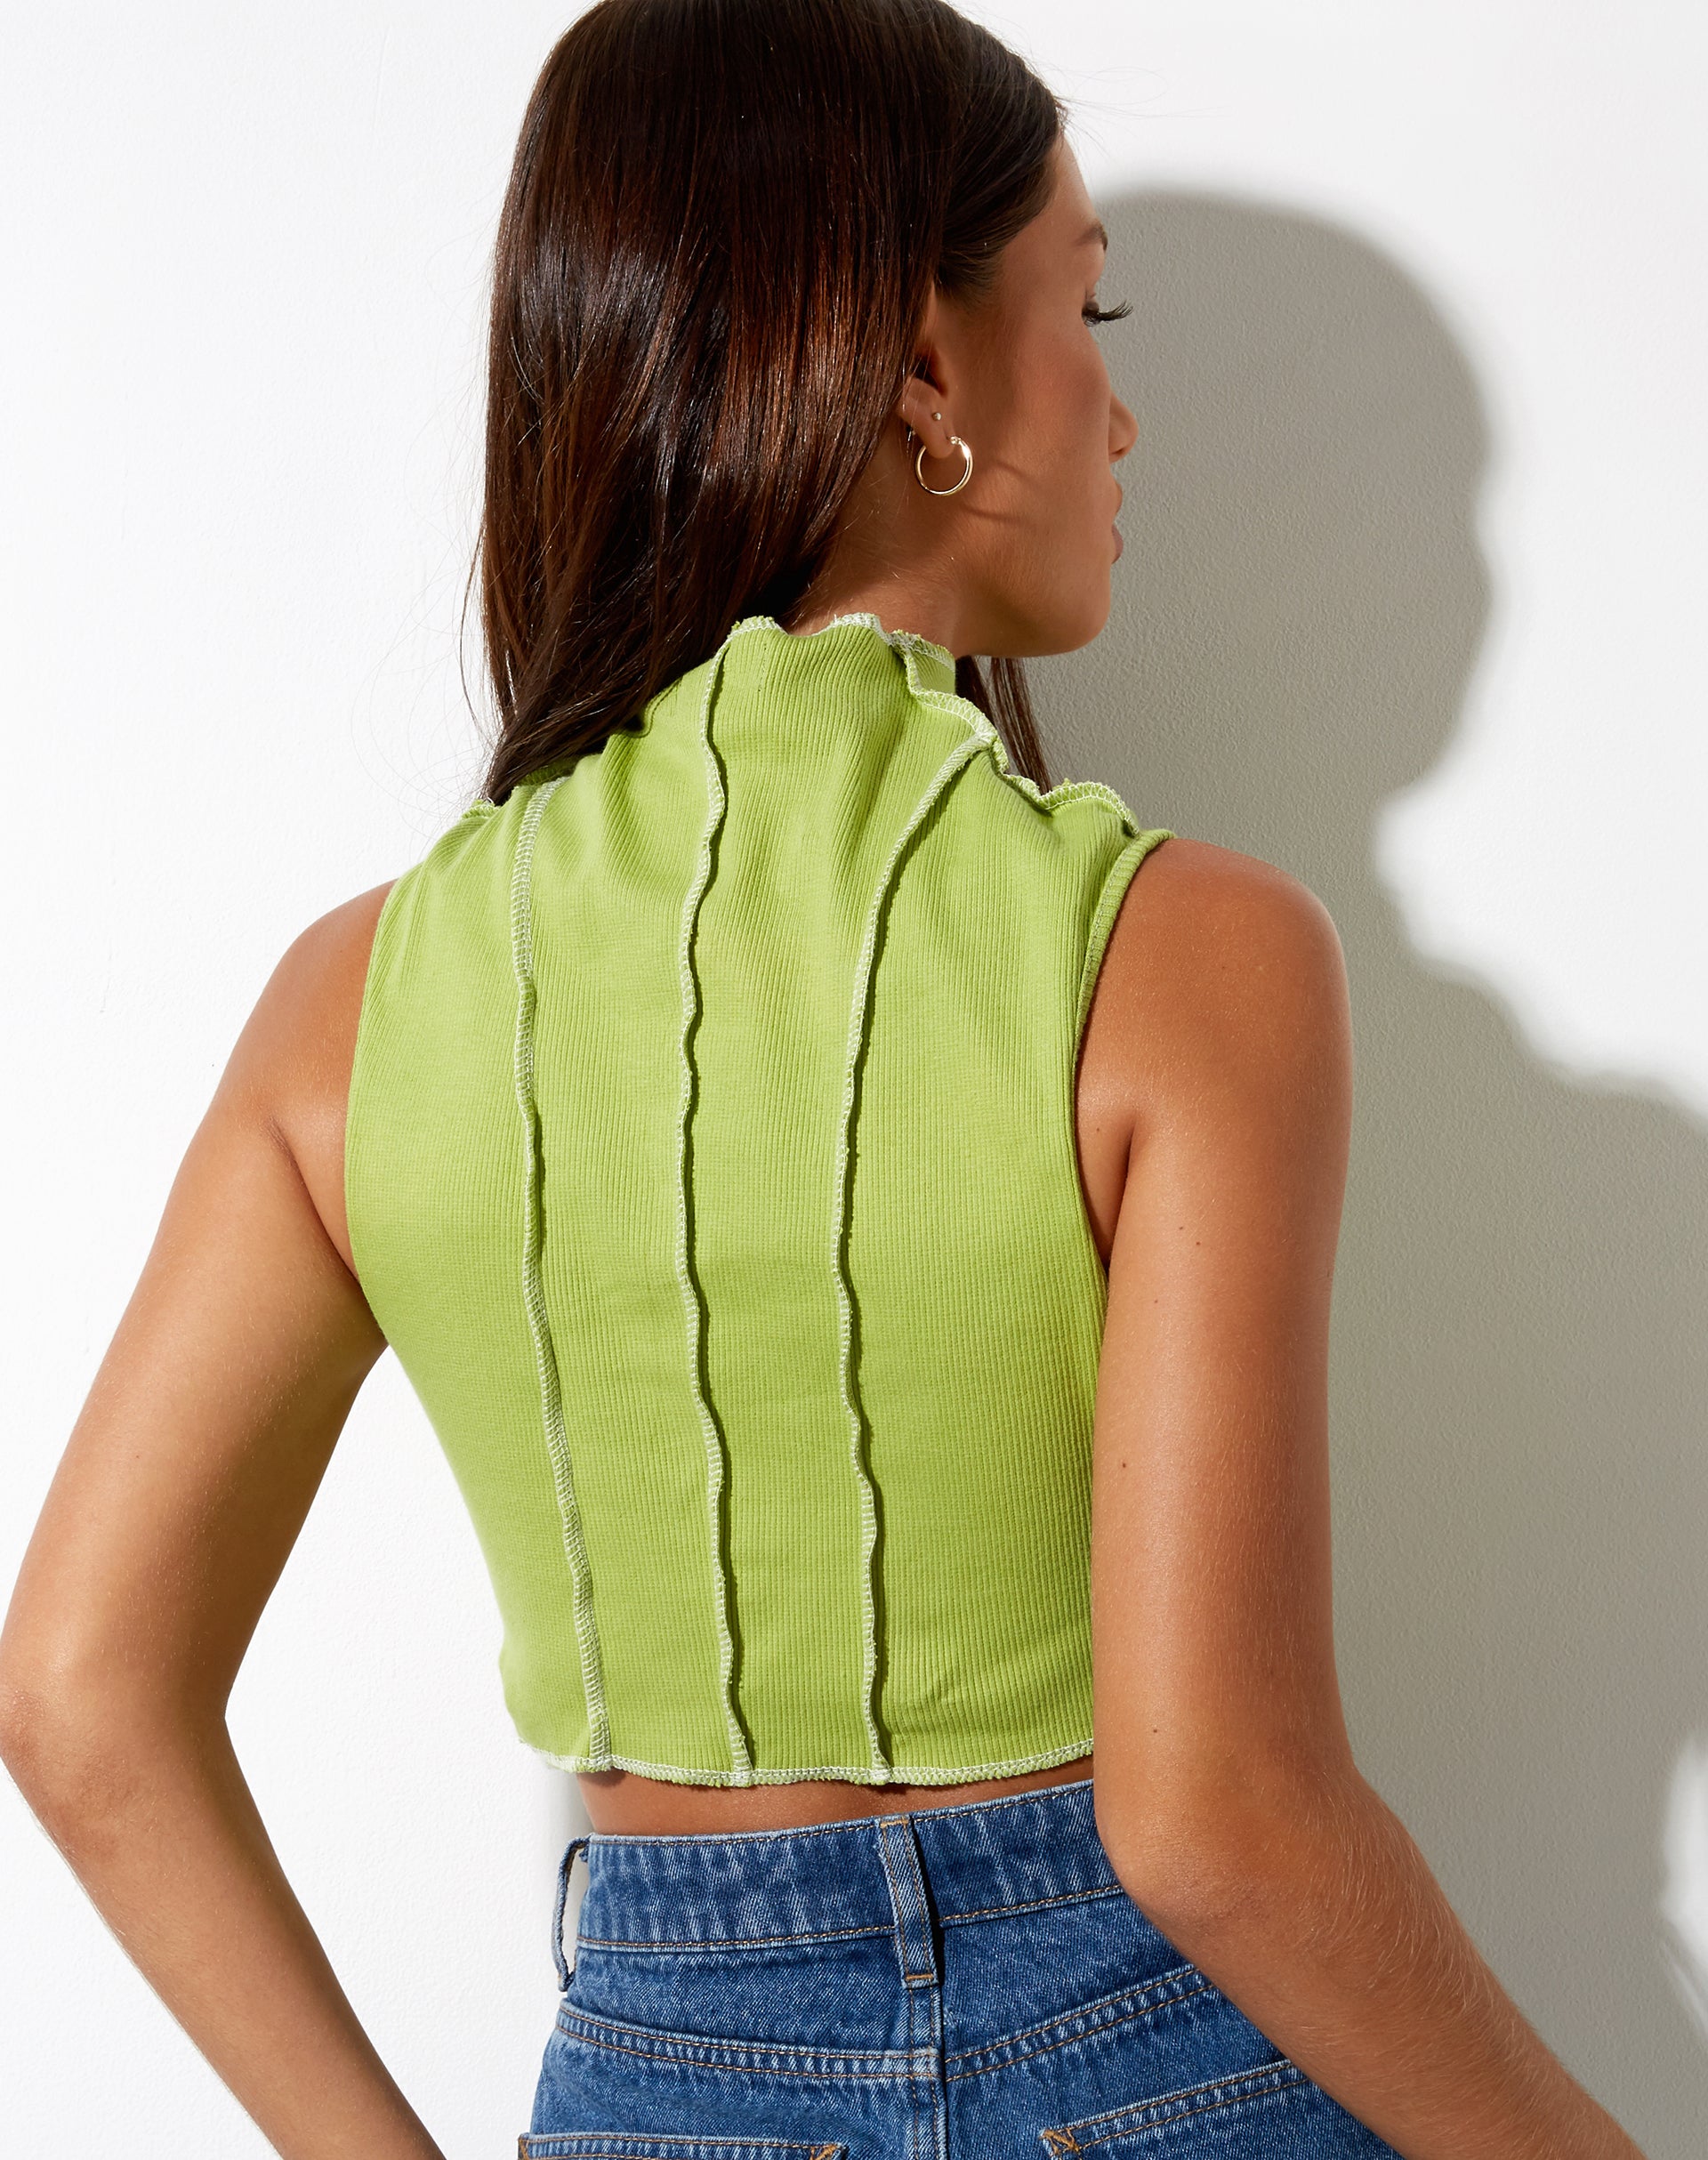 Image of Ivy Vest Top in Rib Leaf Green with Ivory Stitching